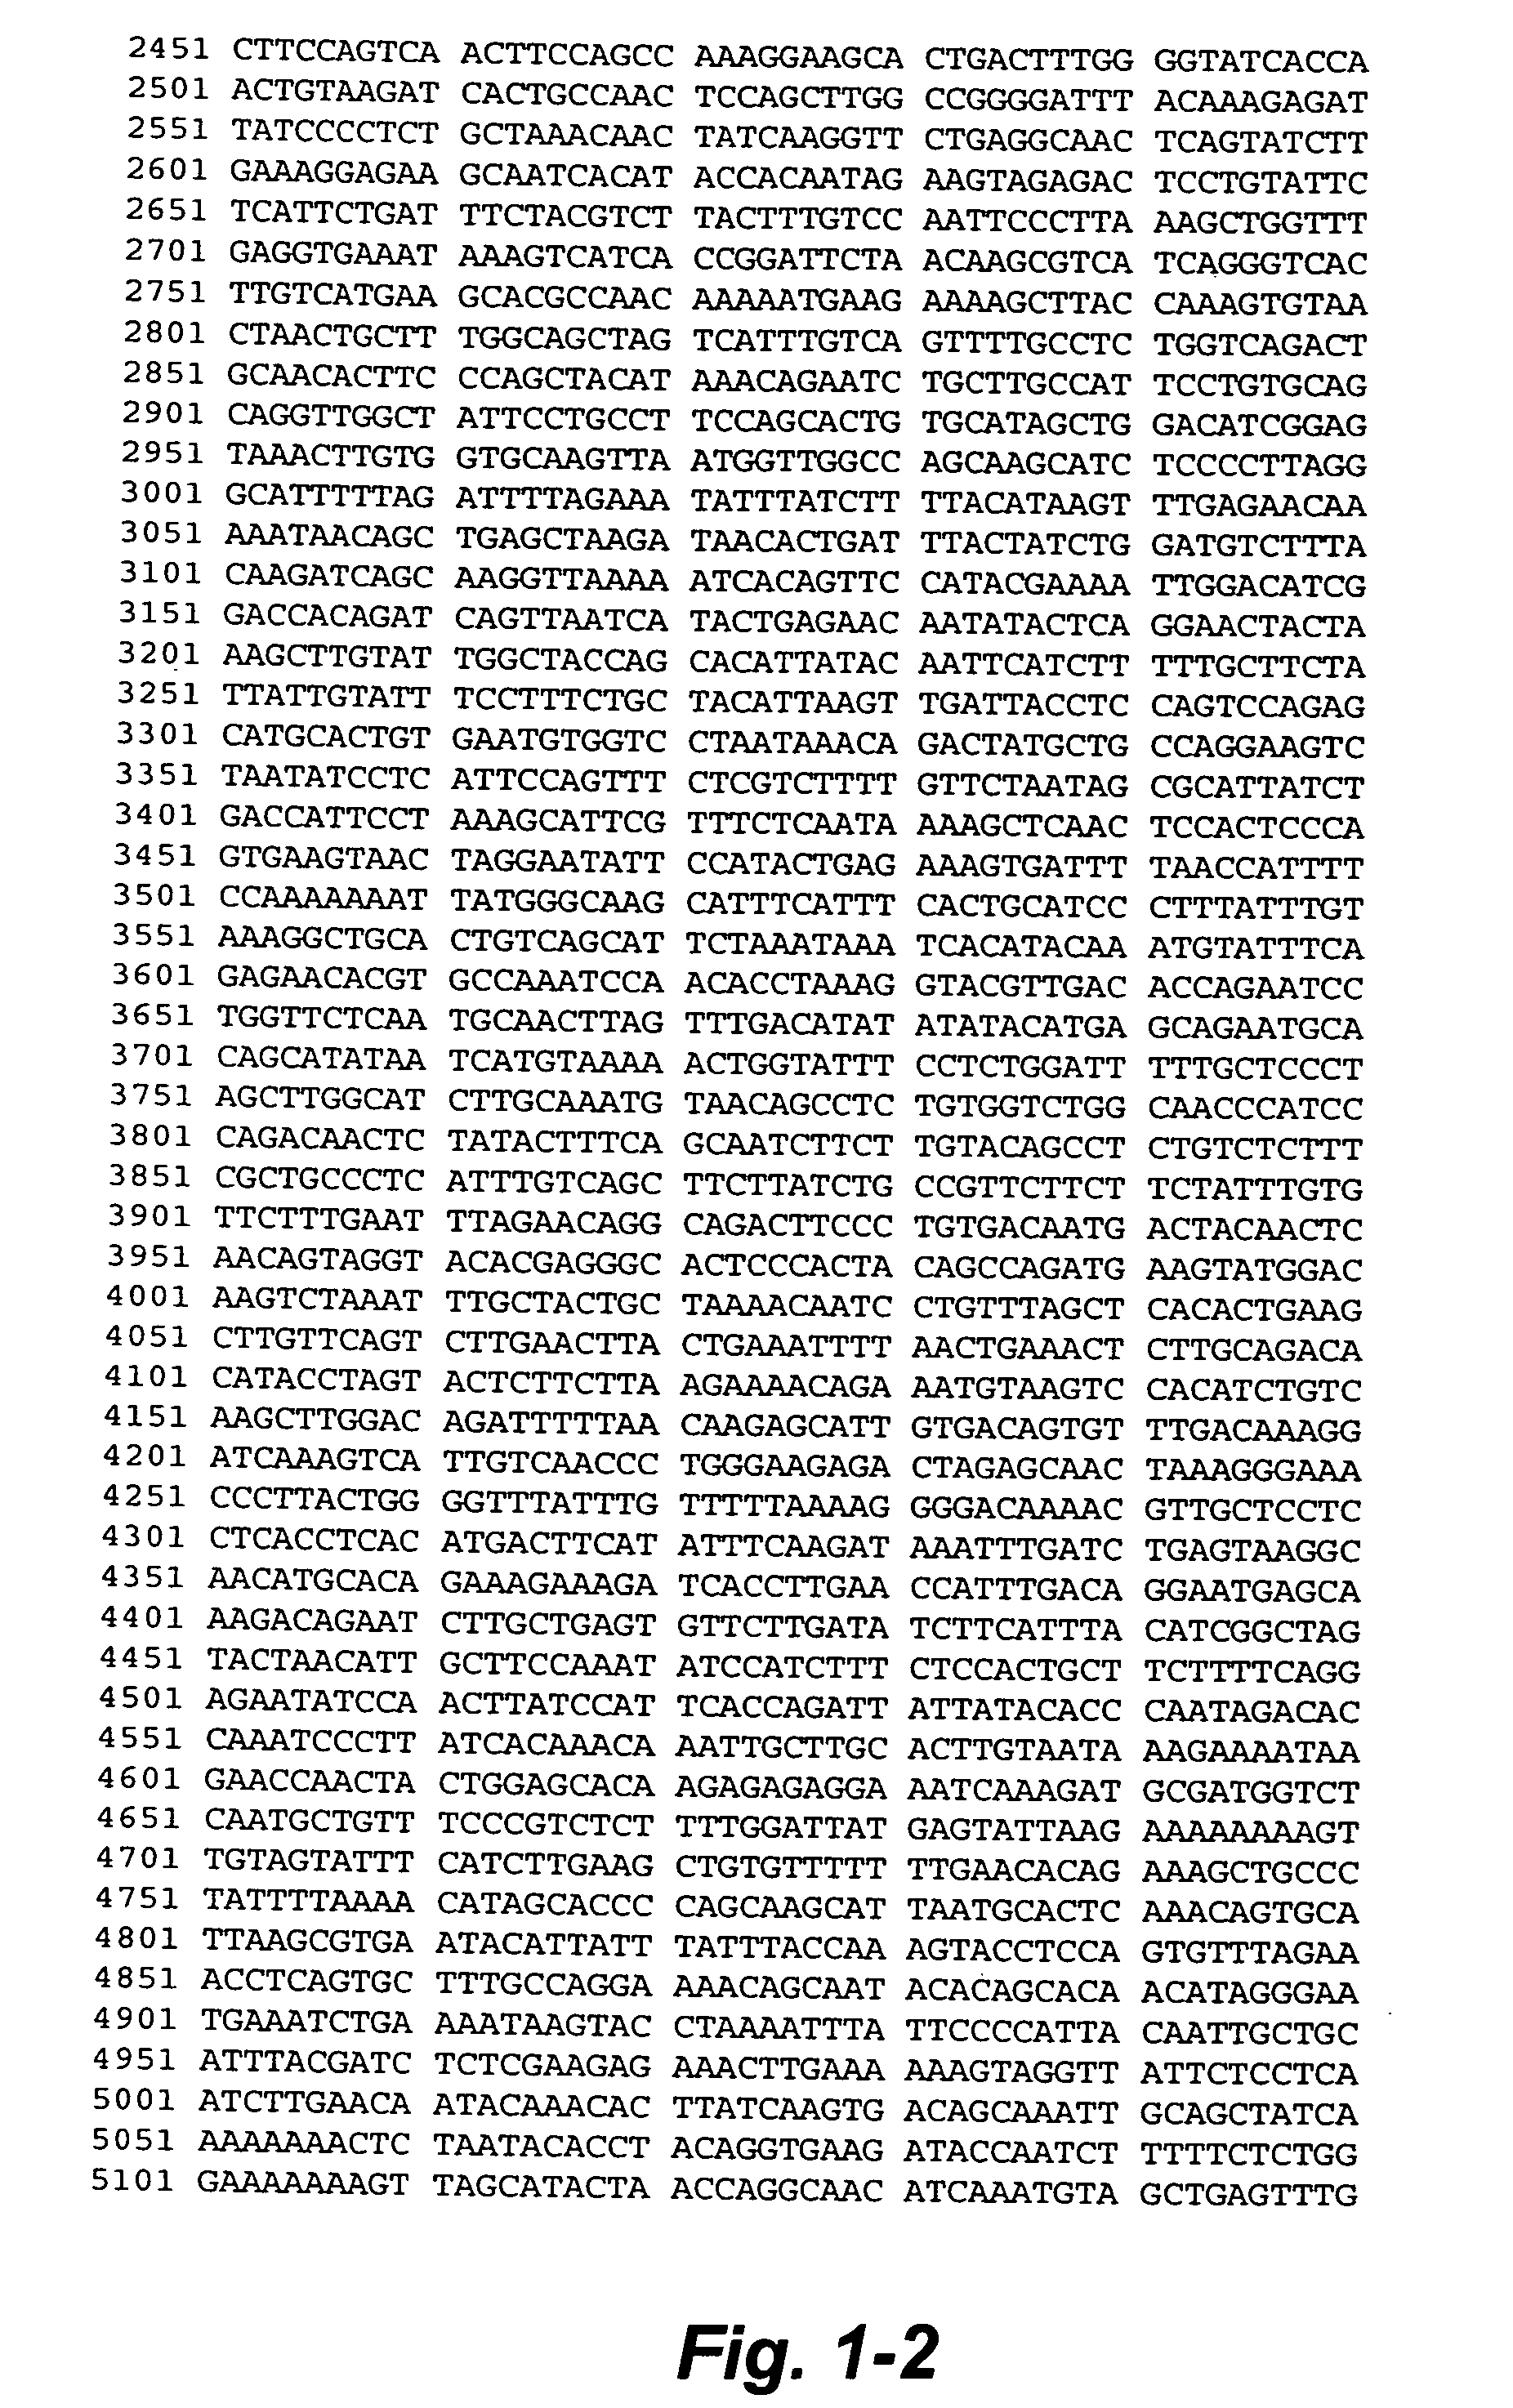 Avian transgenesis using an ovalbumin nucleotide sequence